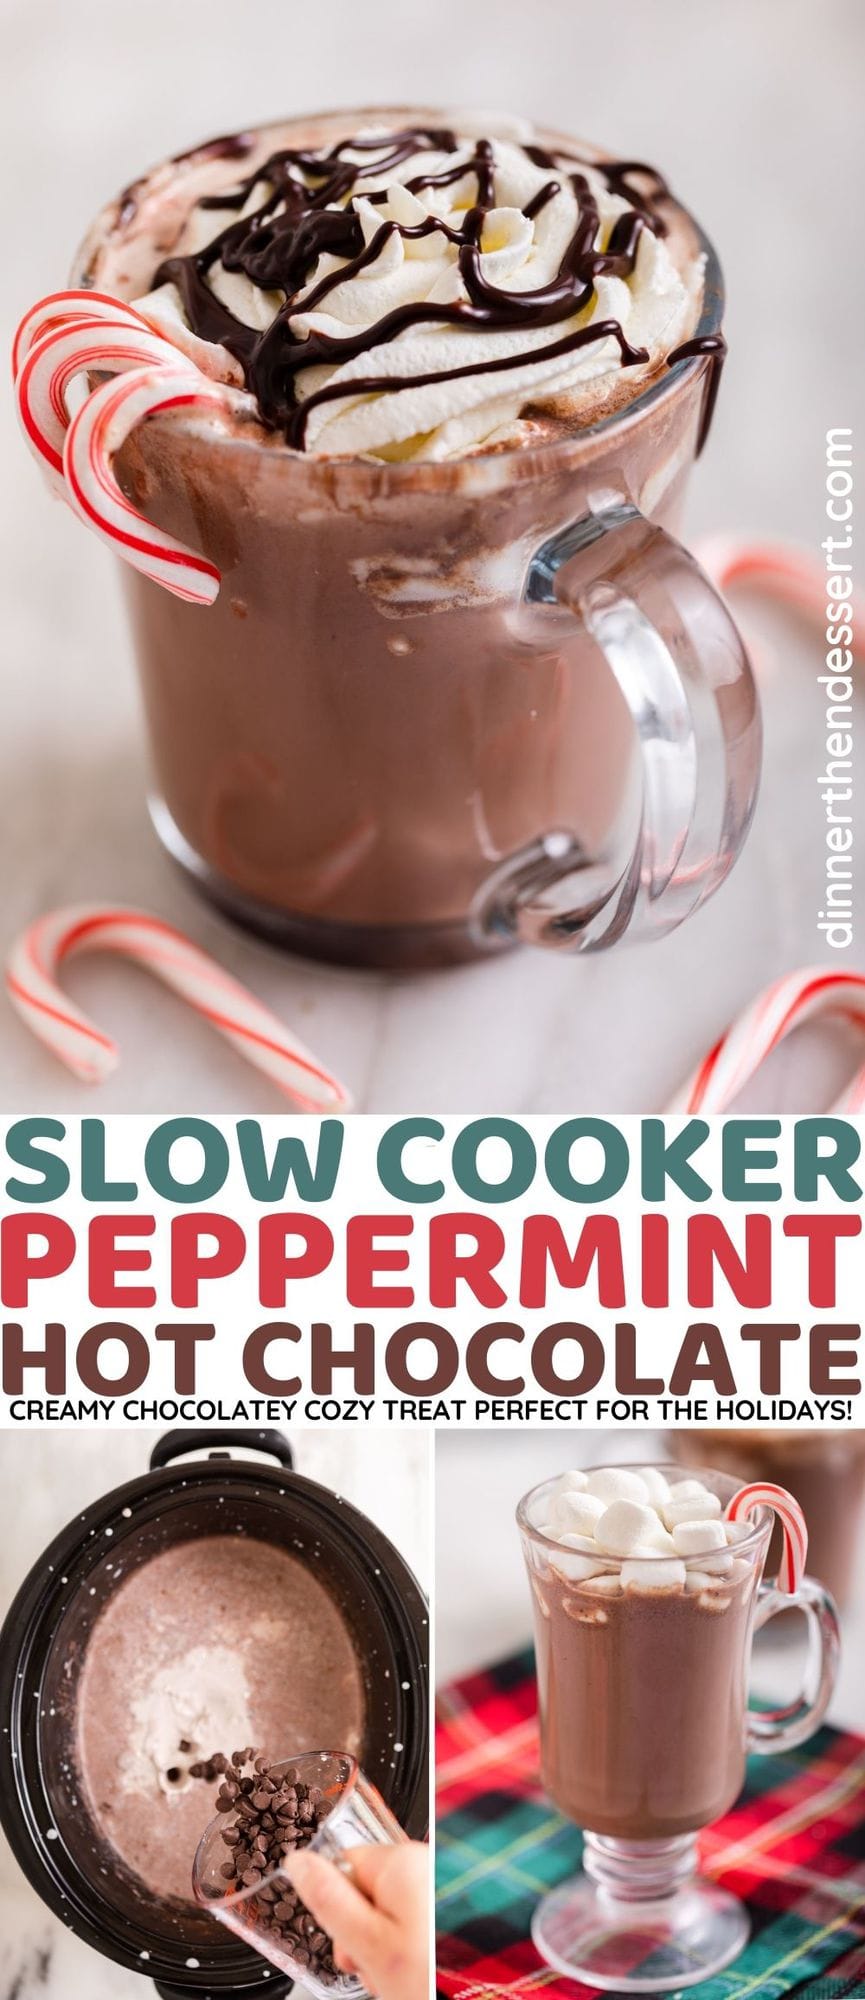 Slow Cooker Peppermint Hot Chocolate in slow cooker and mugs collage